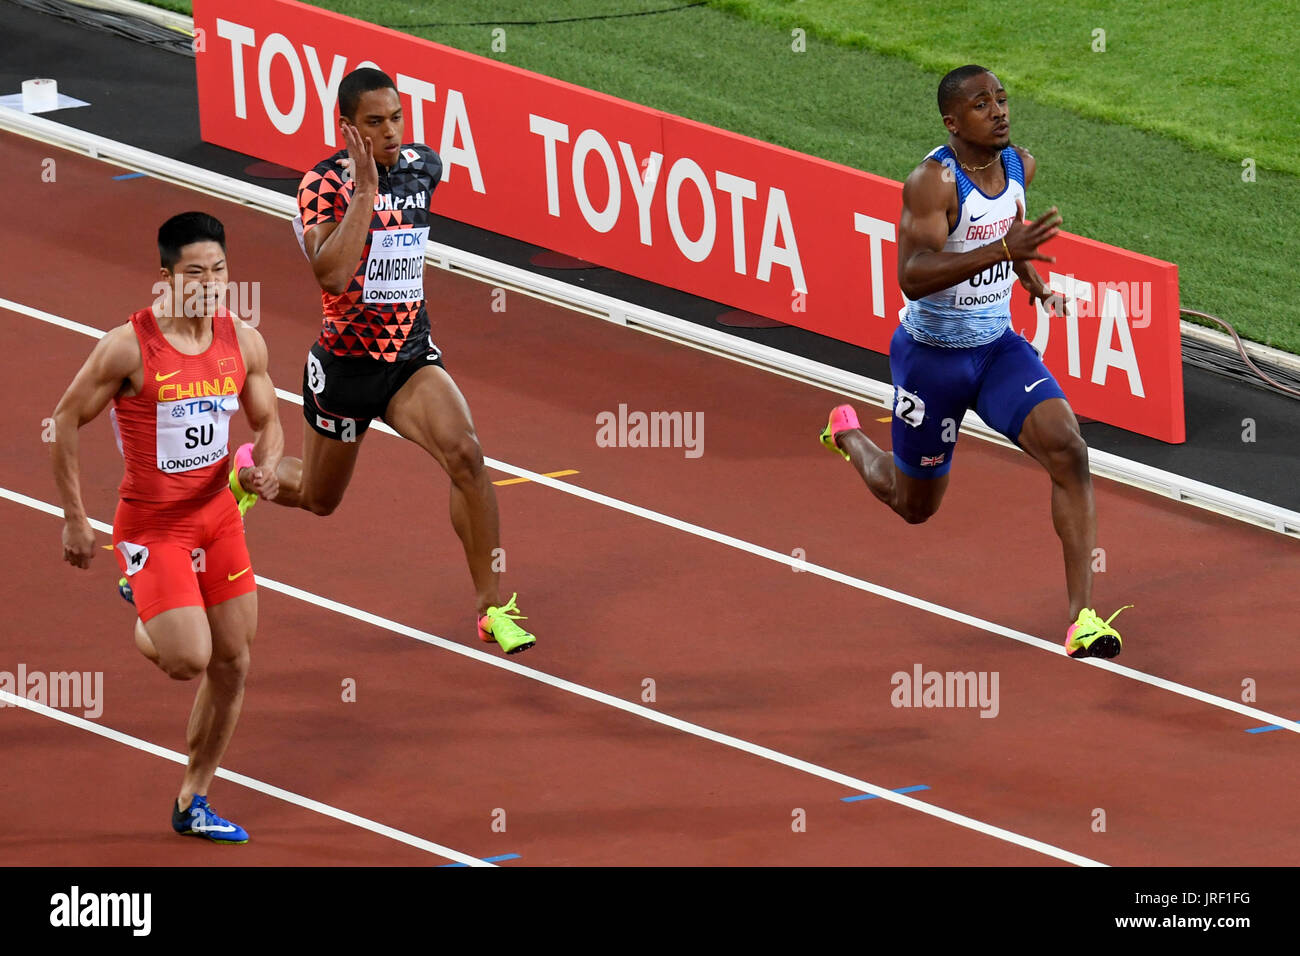 London, UK.  4 August 2017.  (L to R) Bingtian Su (China), Aska Cambridge (Japan) and Chijindu Ujah (GB) during the 100m heats at the London Stadium, in The IAAF World Championships London 2017, during day one's evening session.  Credit: Stephen Chung / Alamy Live News Stock Photo